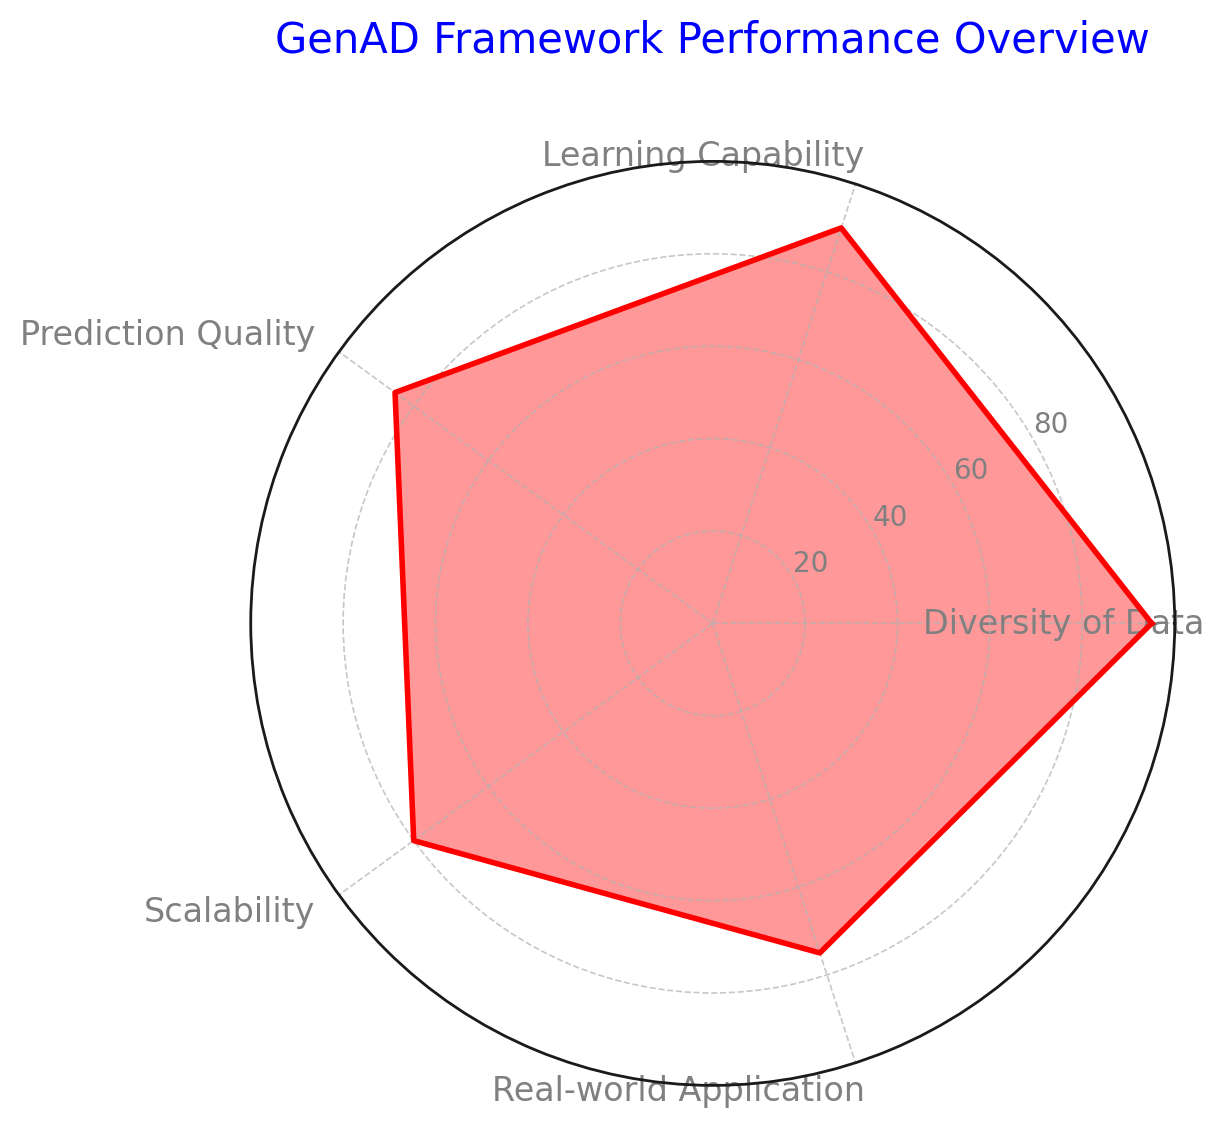 Radar chart displaying the GenAD framework’s performance across five key dimensions: Diversity of Data, Learning Capability, Prediction Quality, Scalability, and Real-world Application, with scores ranging from 75 to 95 out of 100.